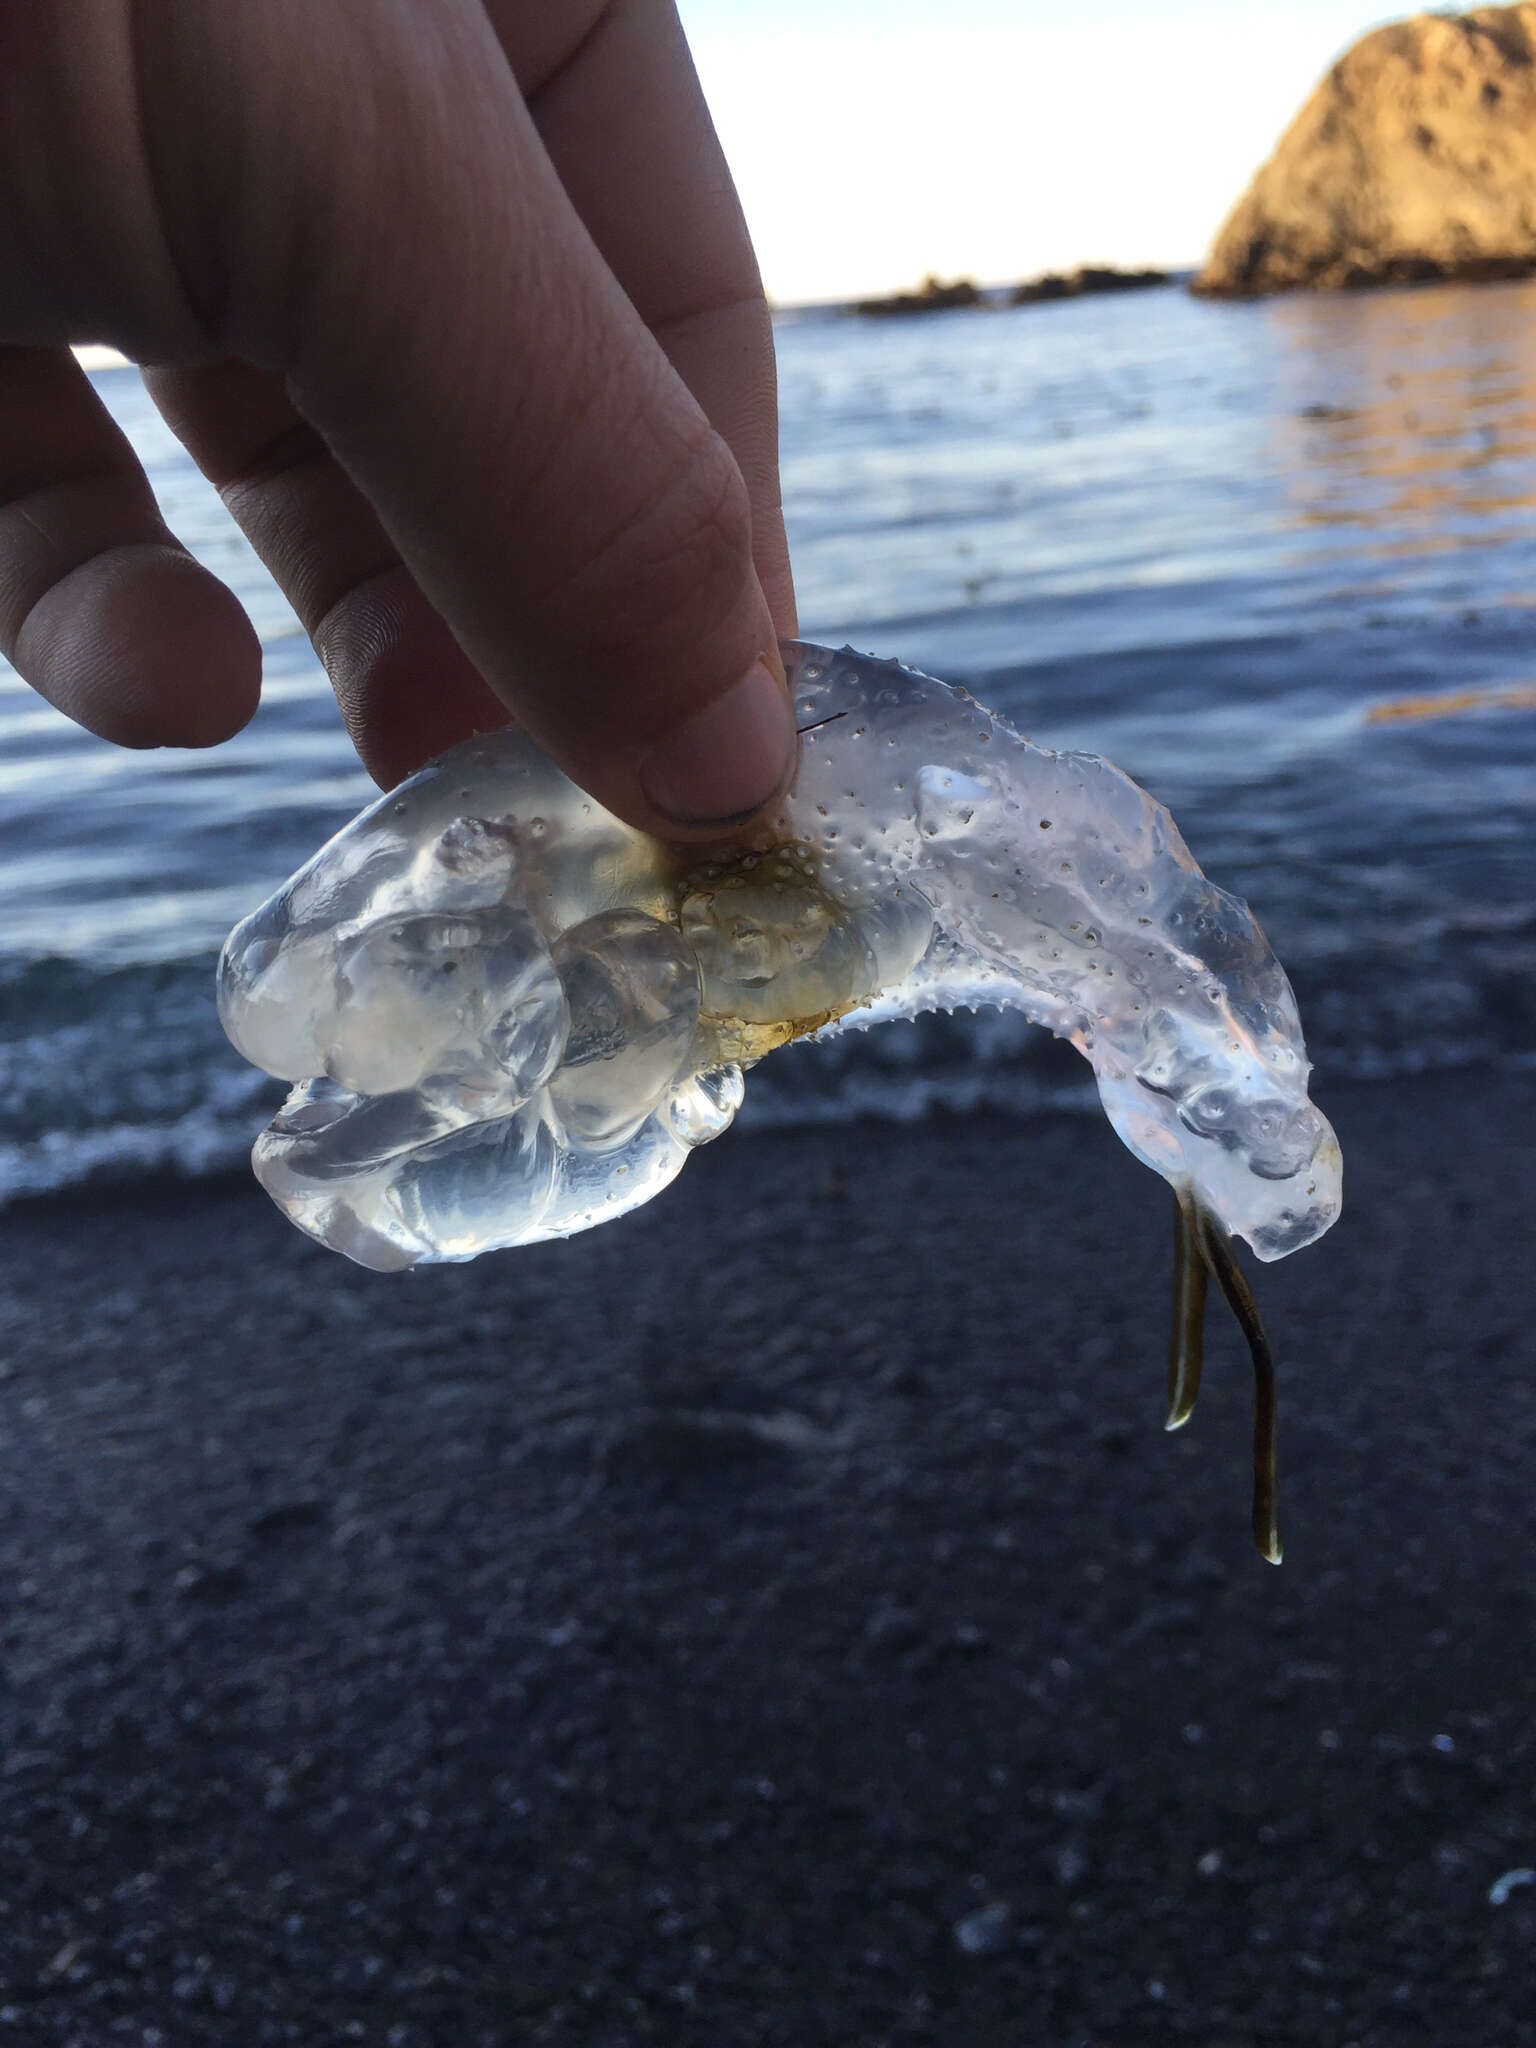 Image of salps